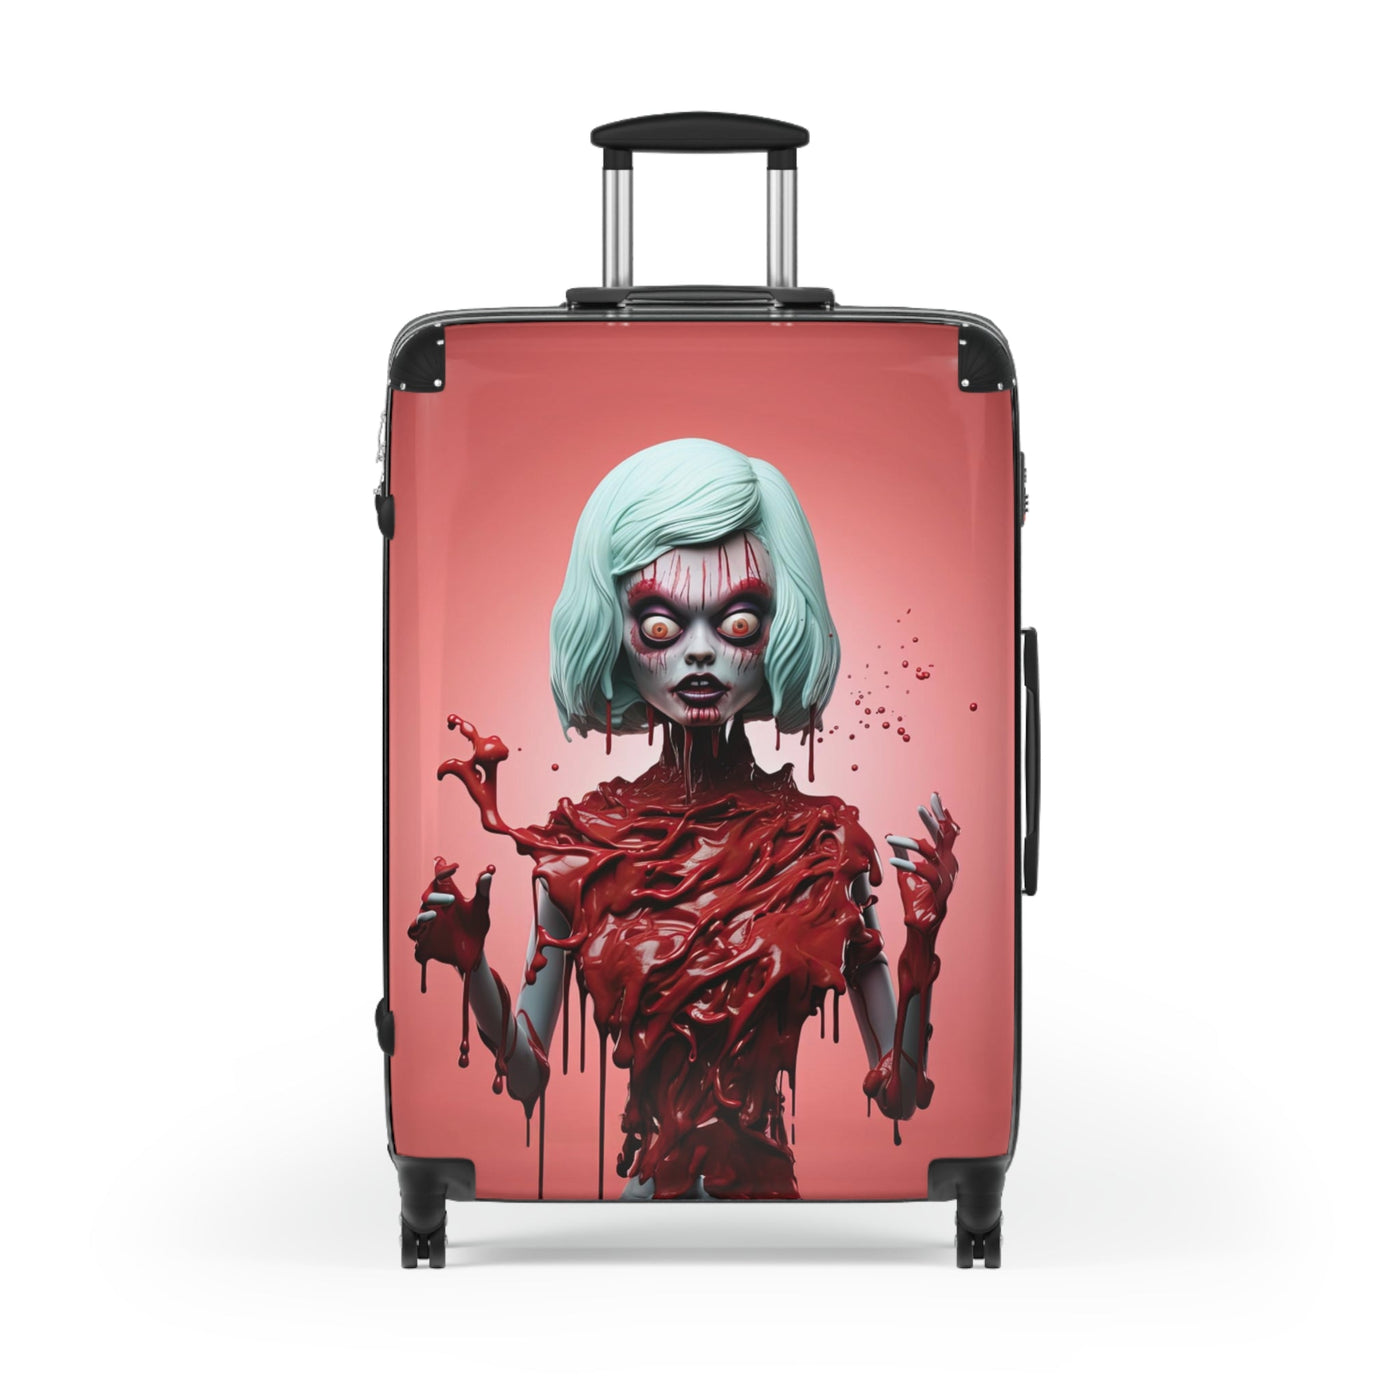 Scary Choco Doll Pop Surreal Travel Suitcase Luggage